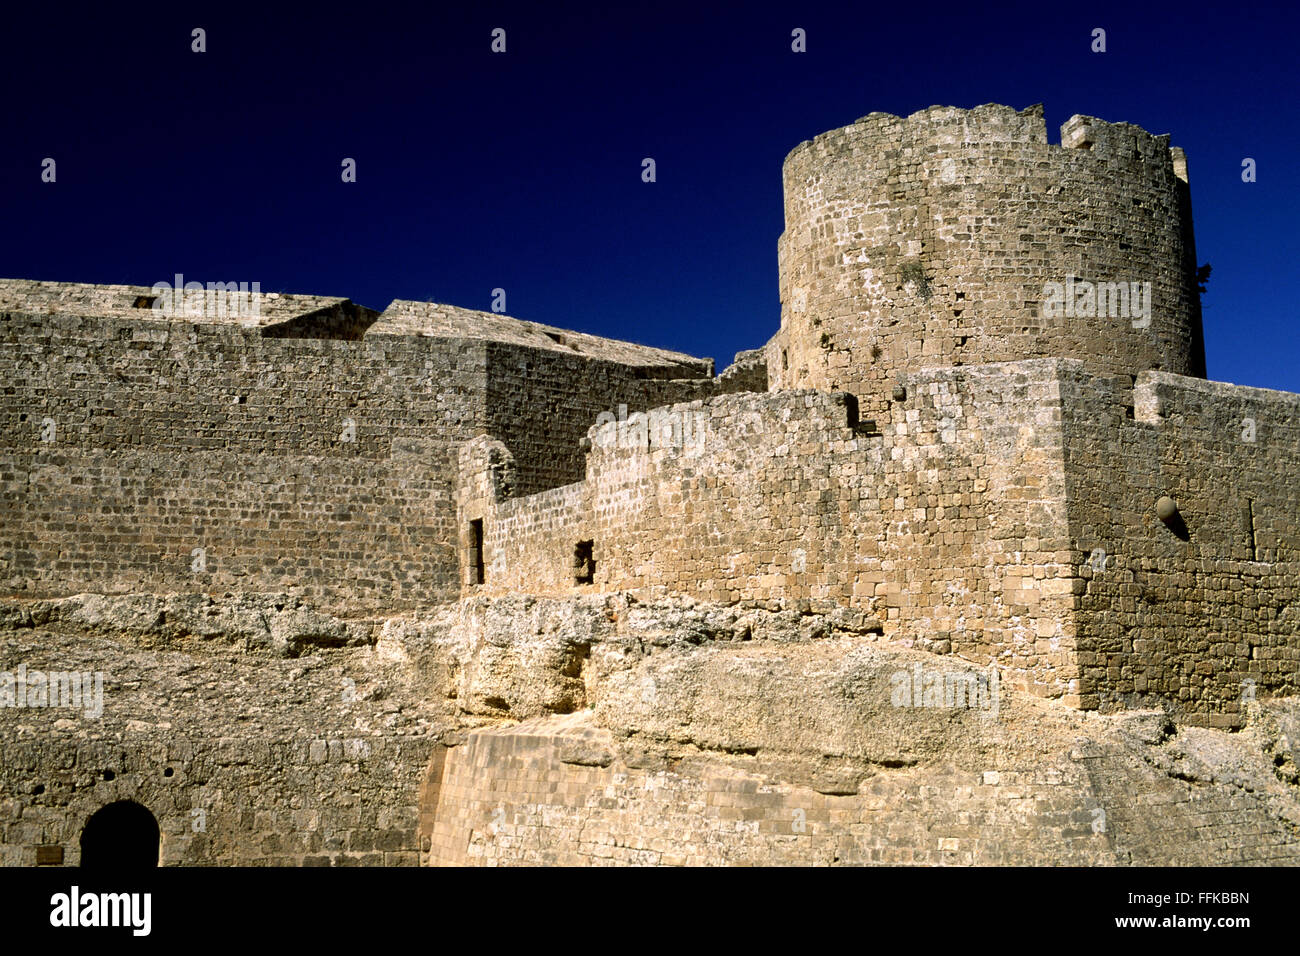 Greece, Dodecanese Islands, Rhodes, old town walls Stock Photo